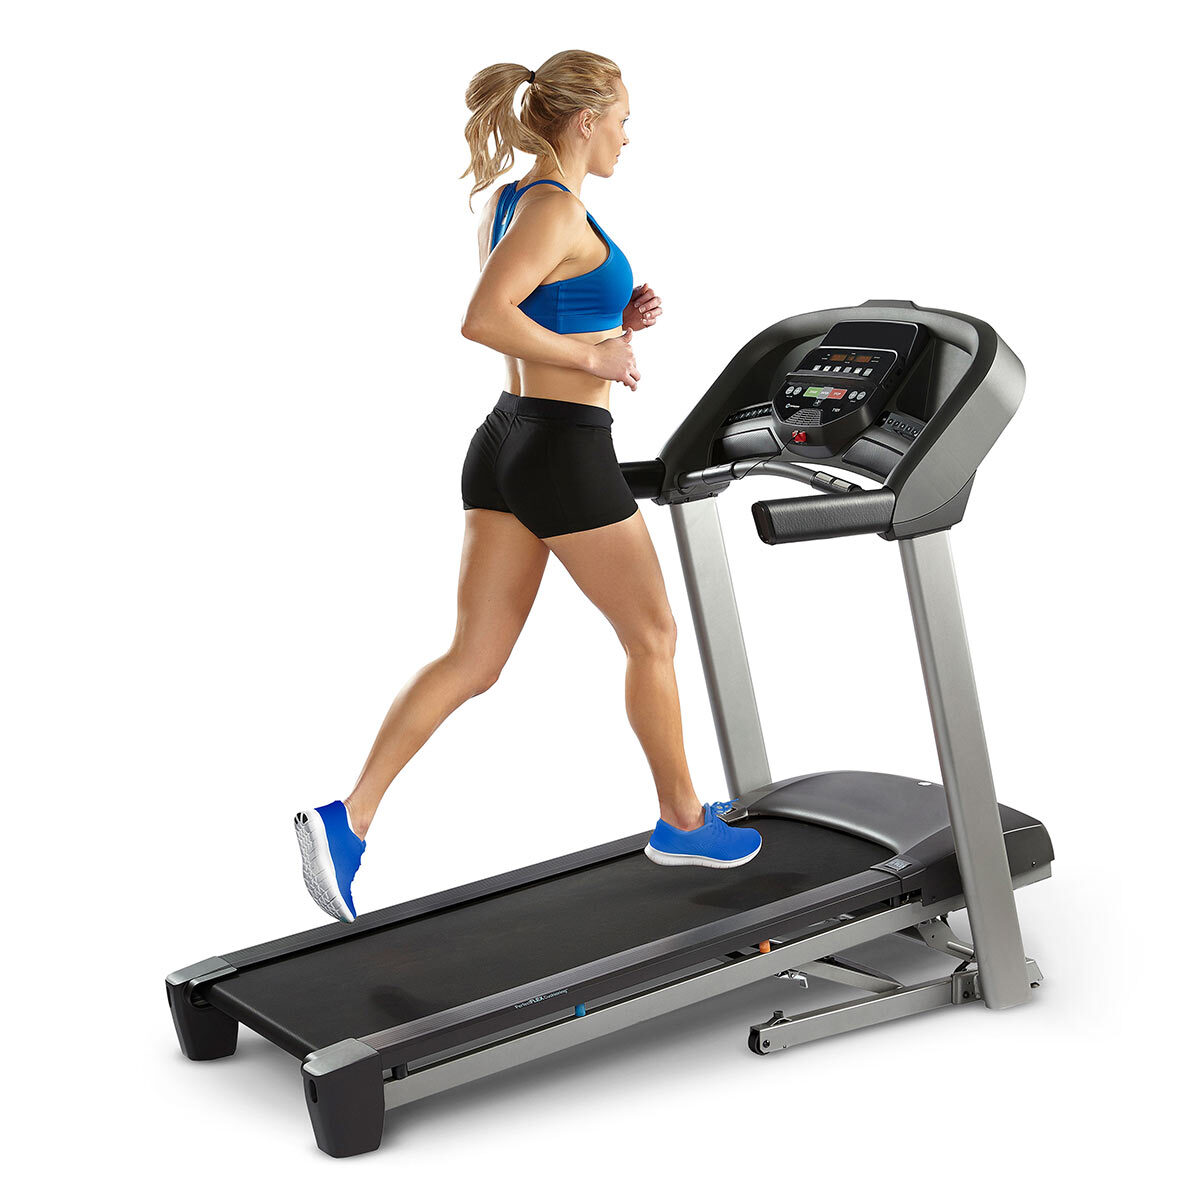 Horizon Fitness T101 Treadmill with person running